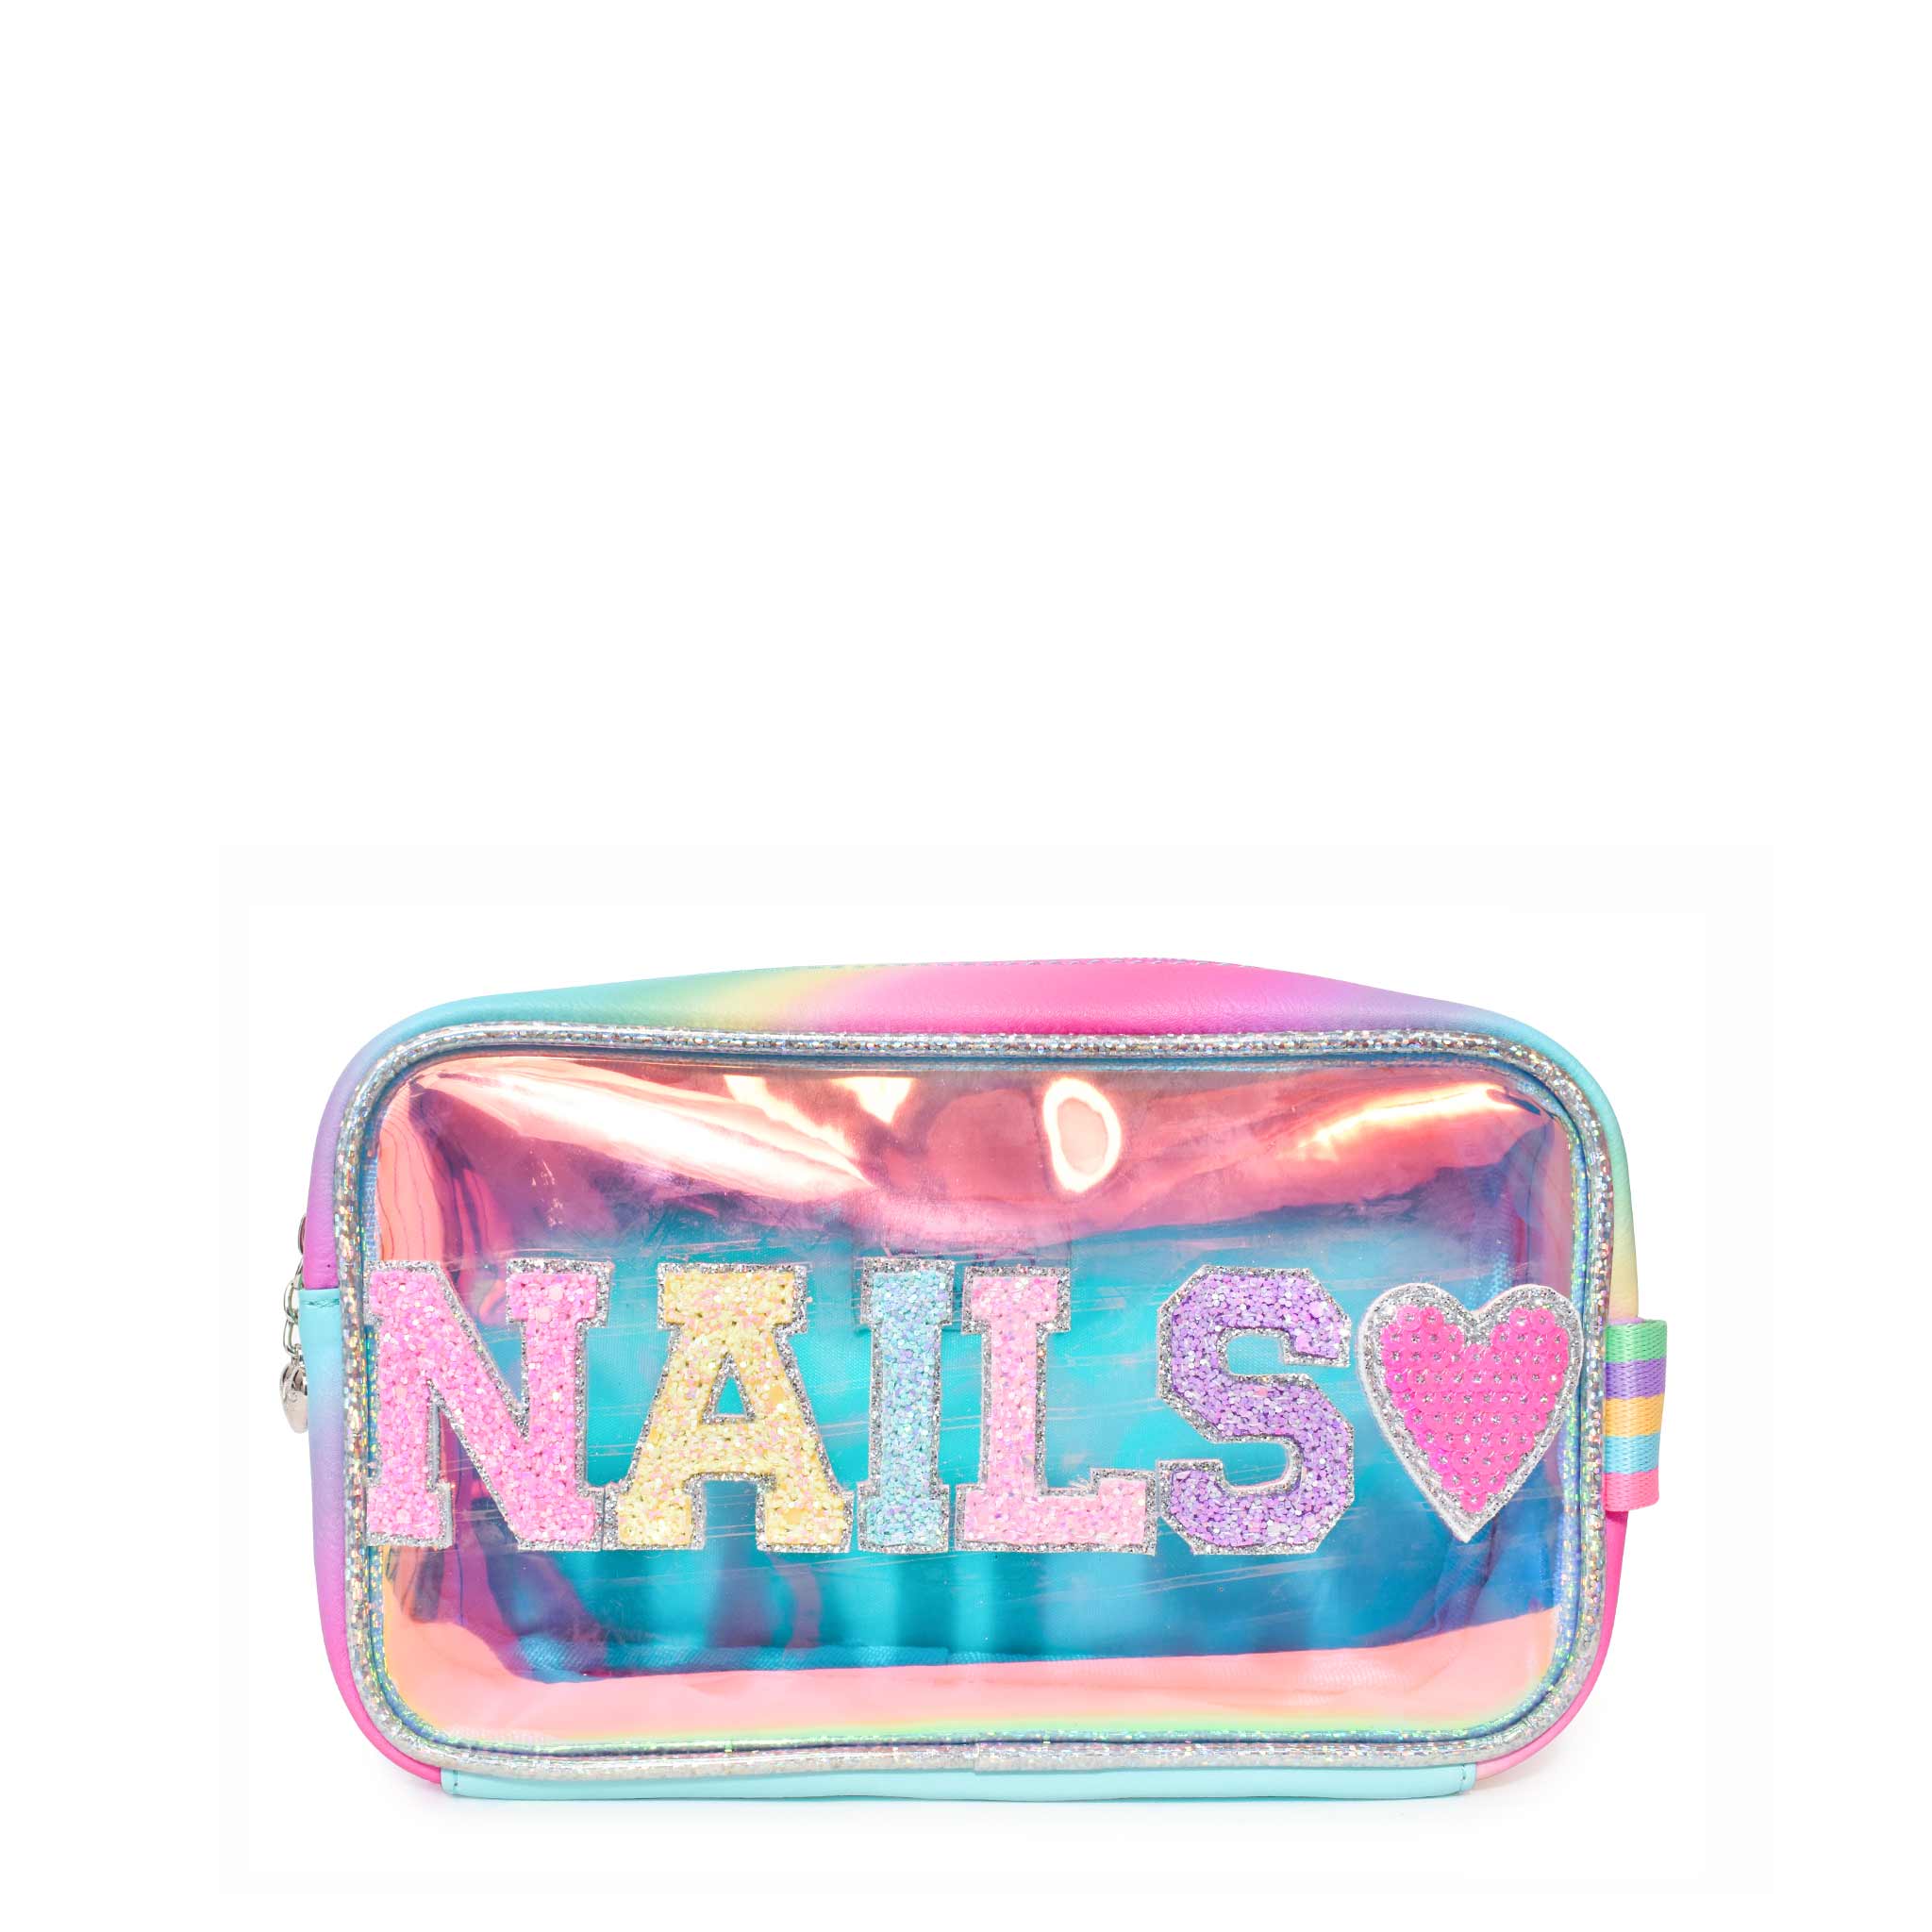 'Nails' Iridescent Clear Pouch